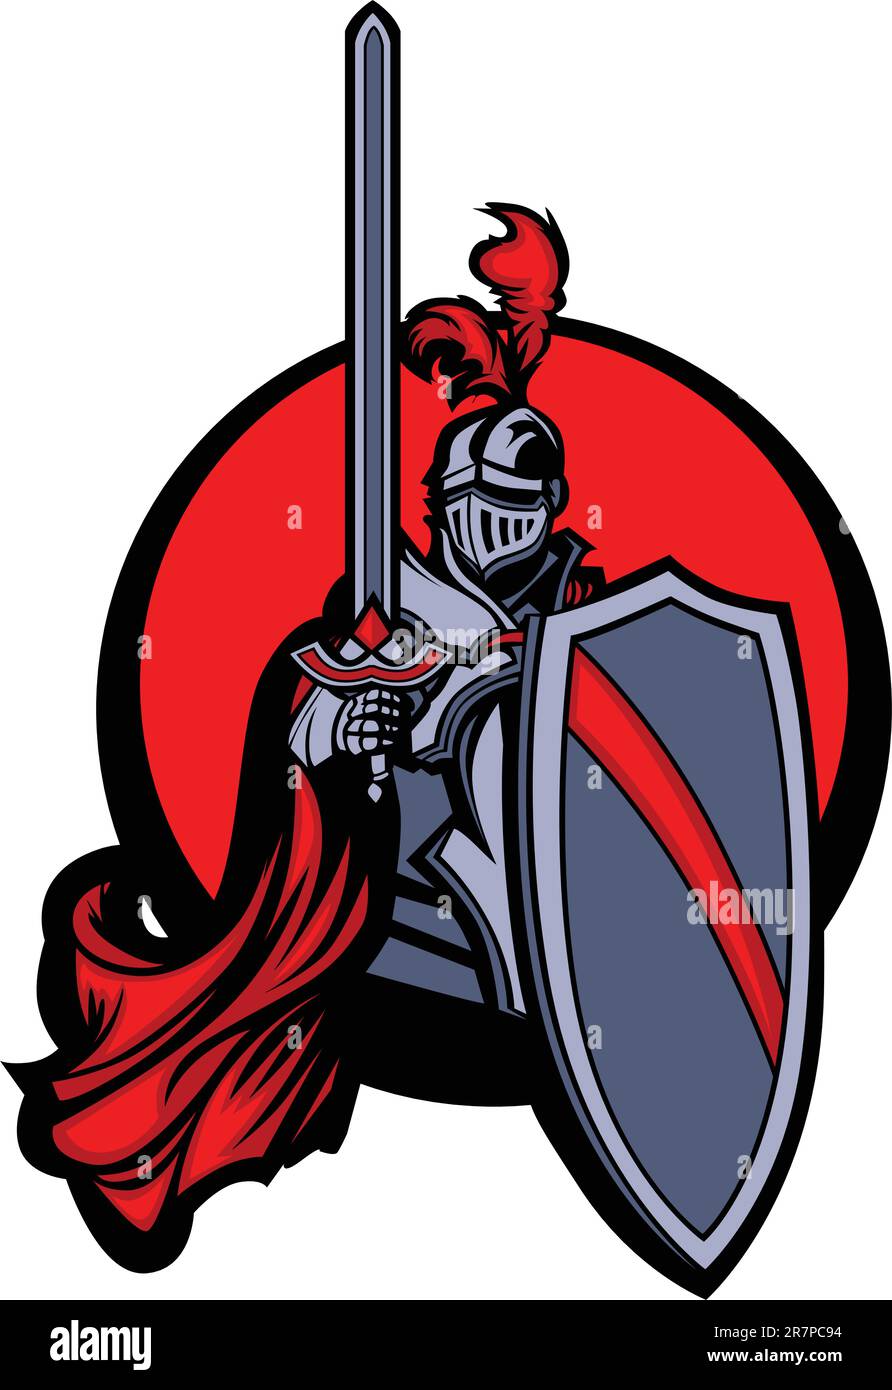 Medieval Knight Vector Mascot Holding a Shield and Sword and Wearing ...